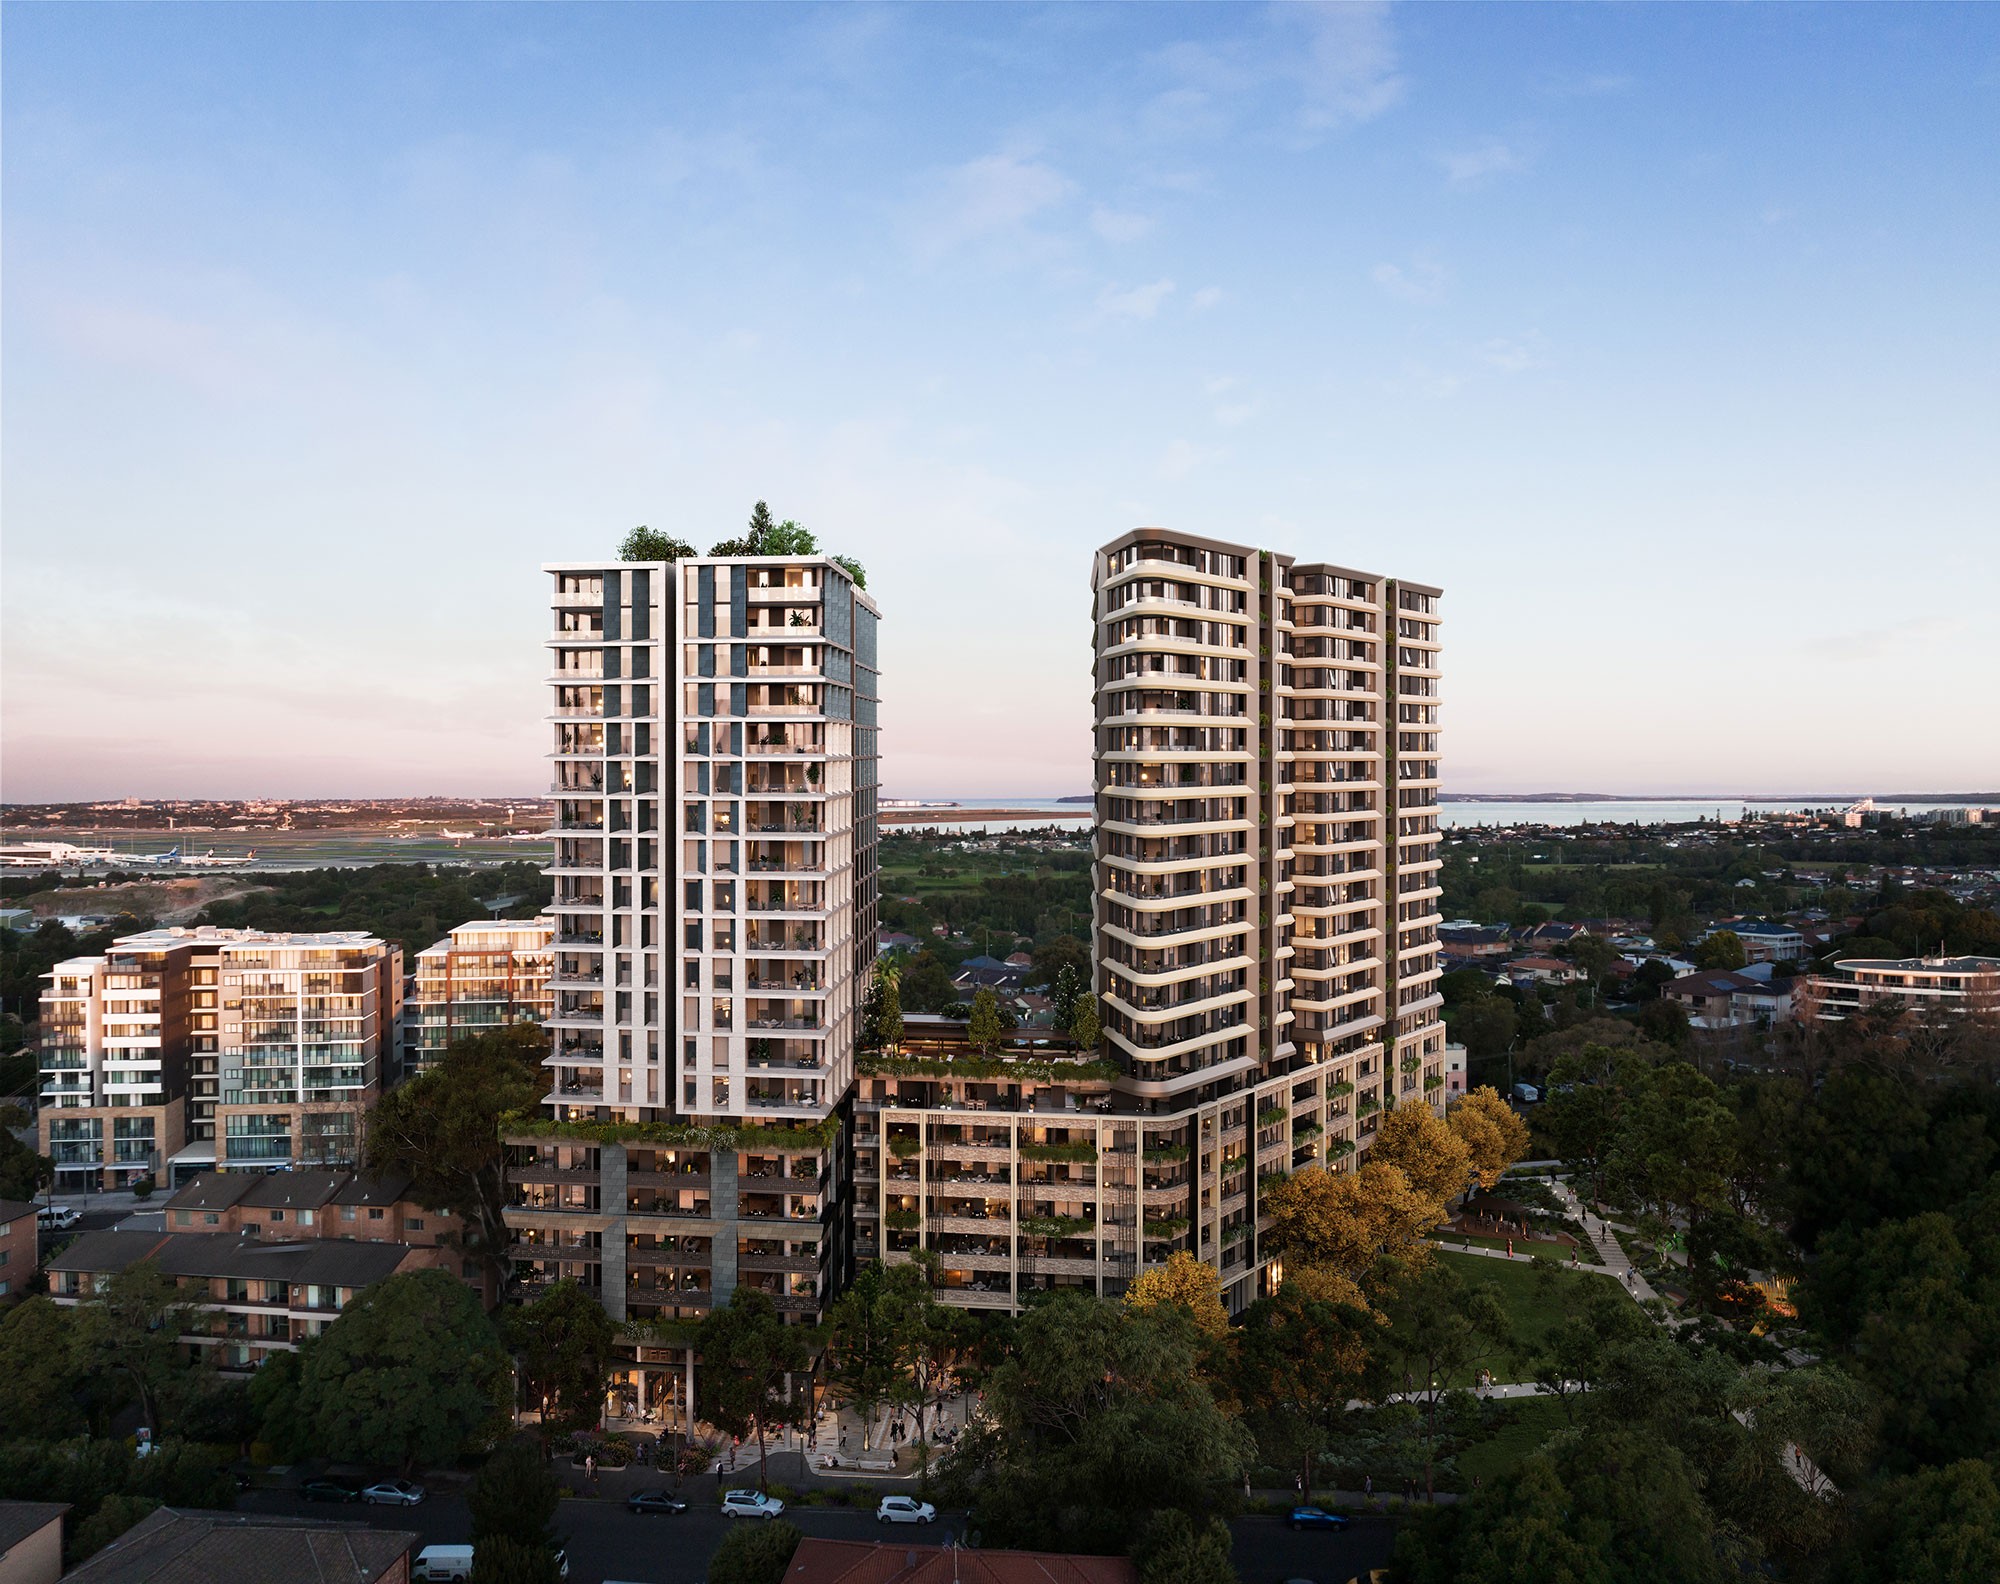 Arncliffe Central by Billbergia to Bring City Living in Suburbia